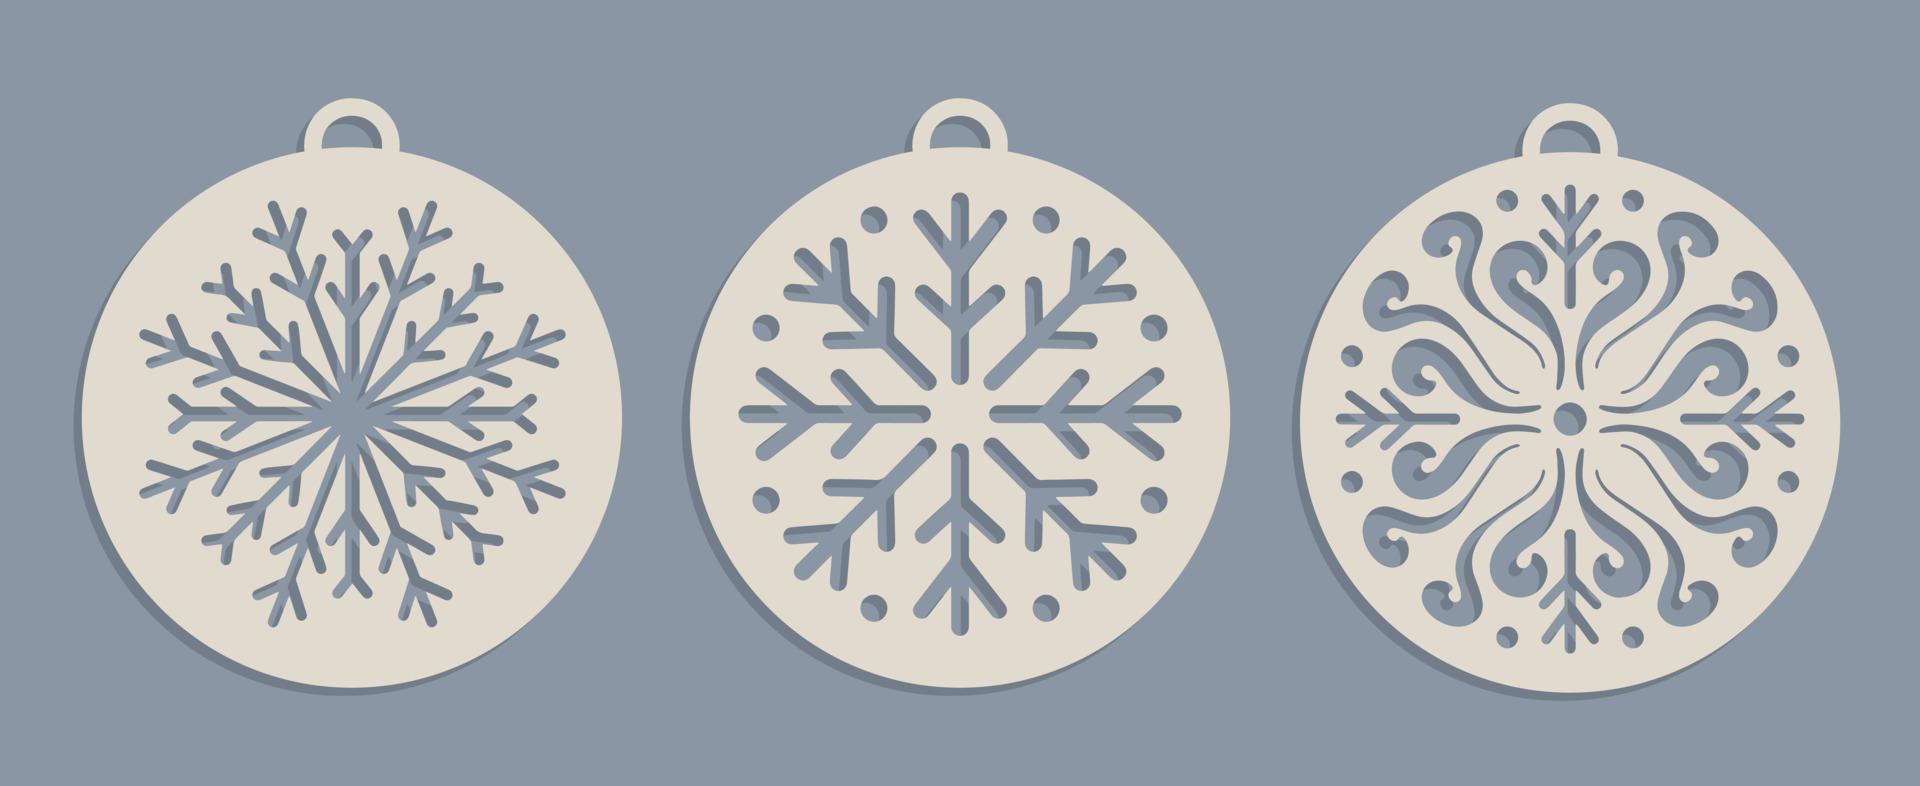 Set of Laser cut Christmas baubles Templates. Christmas tree wood decorations balls with snowflakes vector